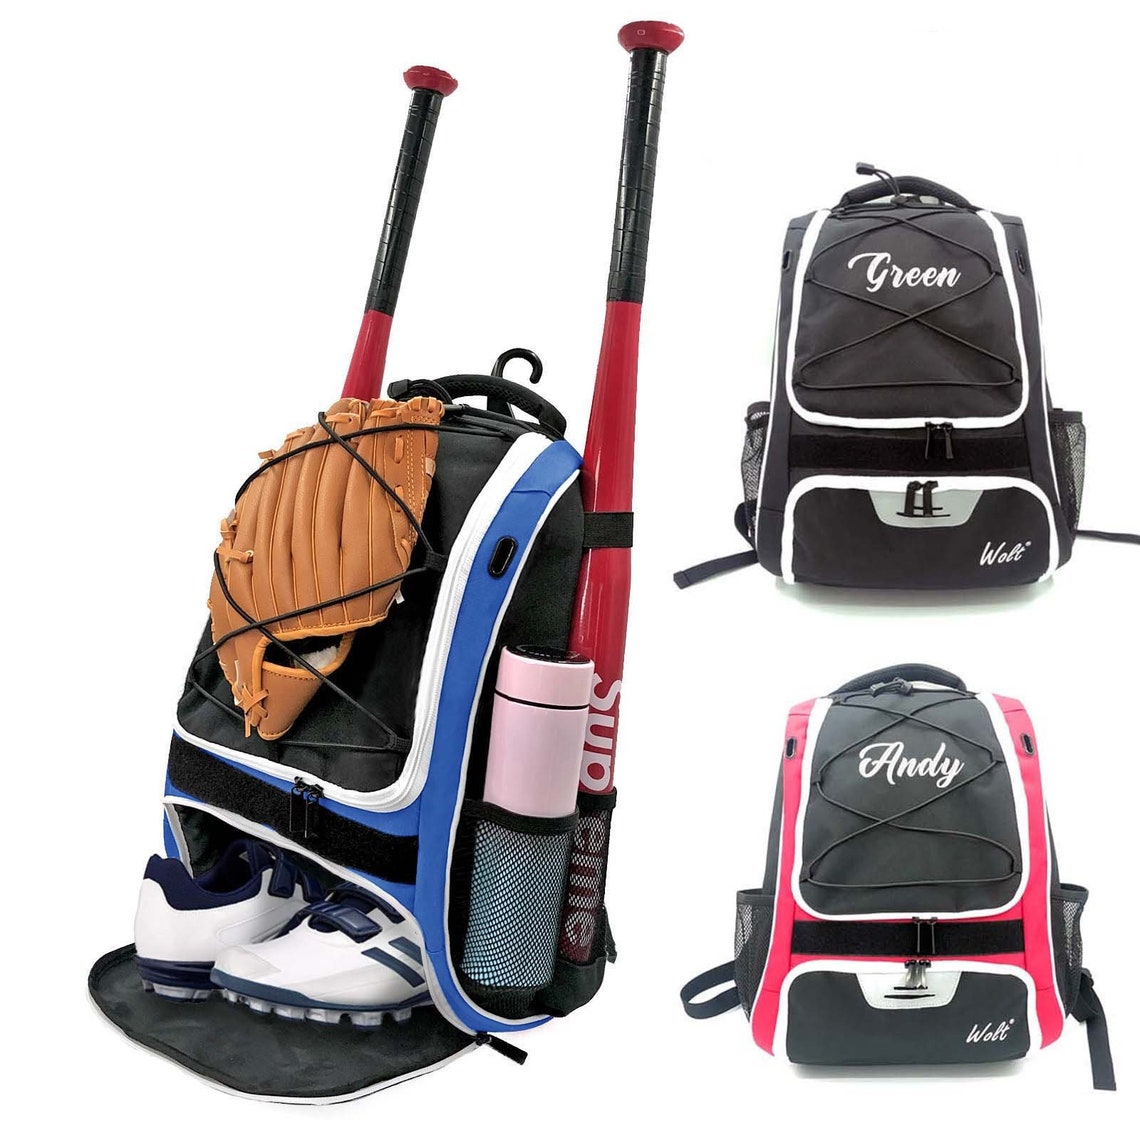 Personalized Custom Name Baseball Backpack - Large Main Compartment for Helmet and Separate Shoes Compartment